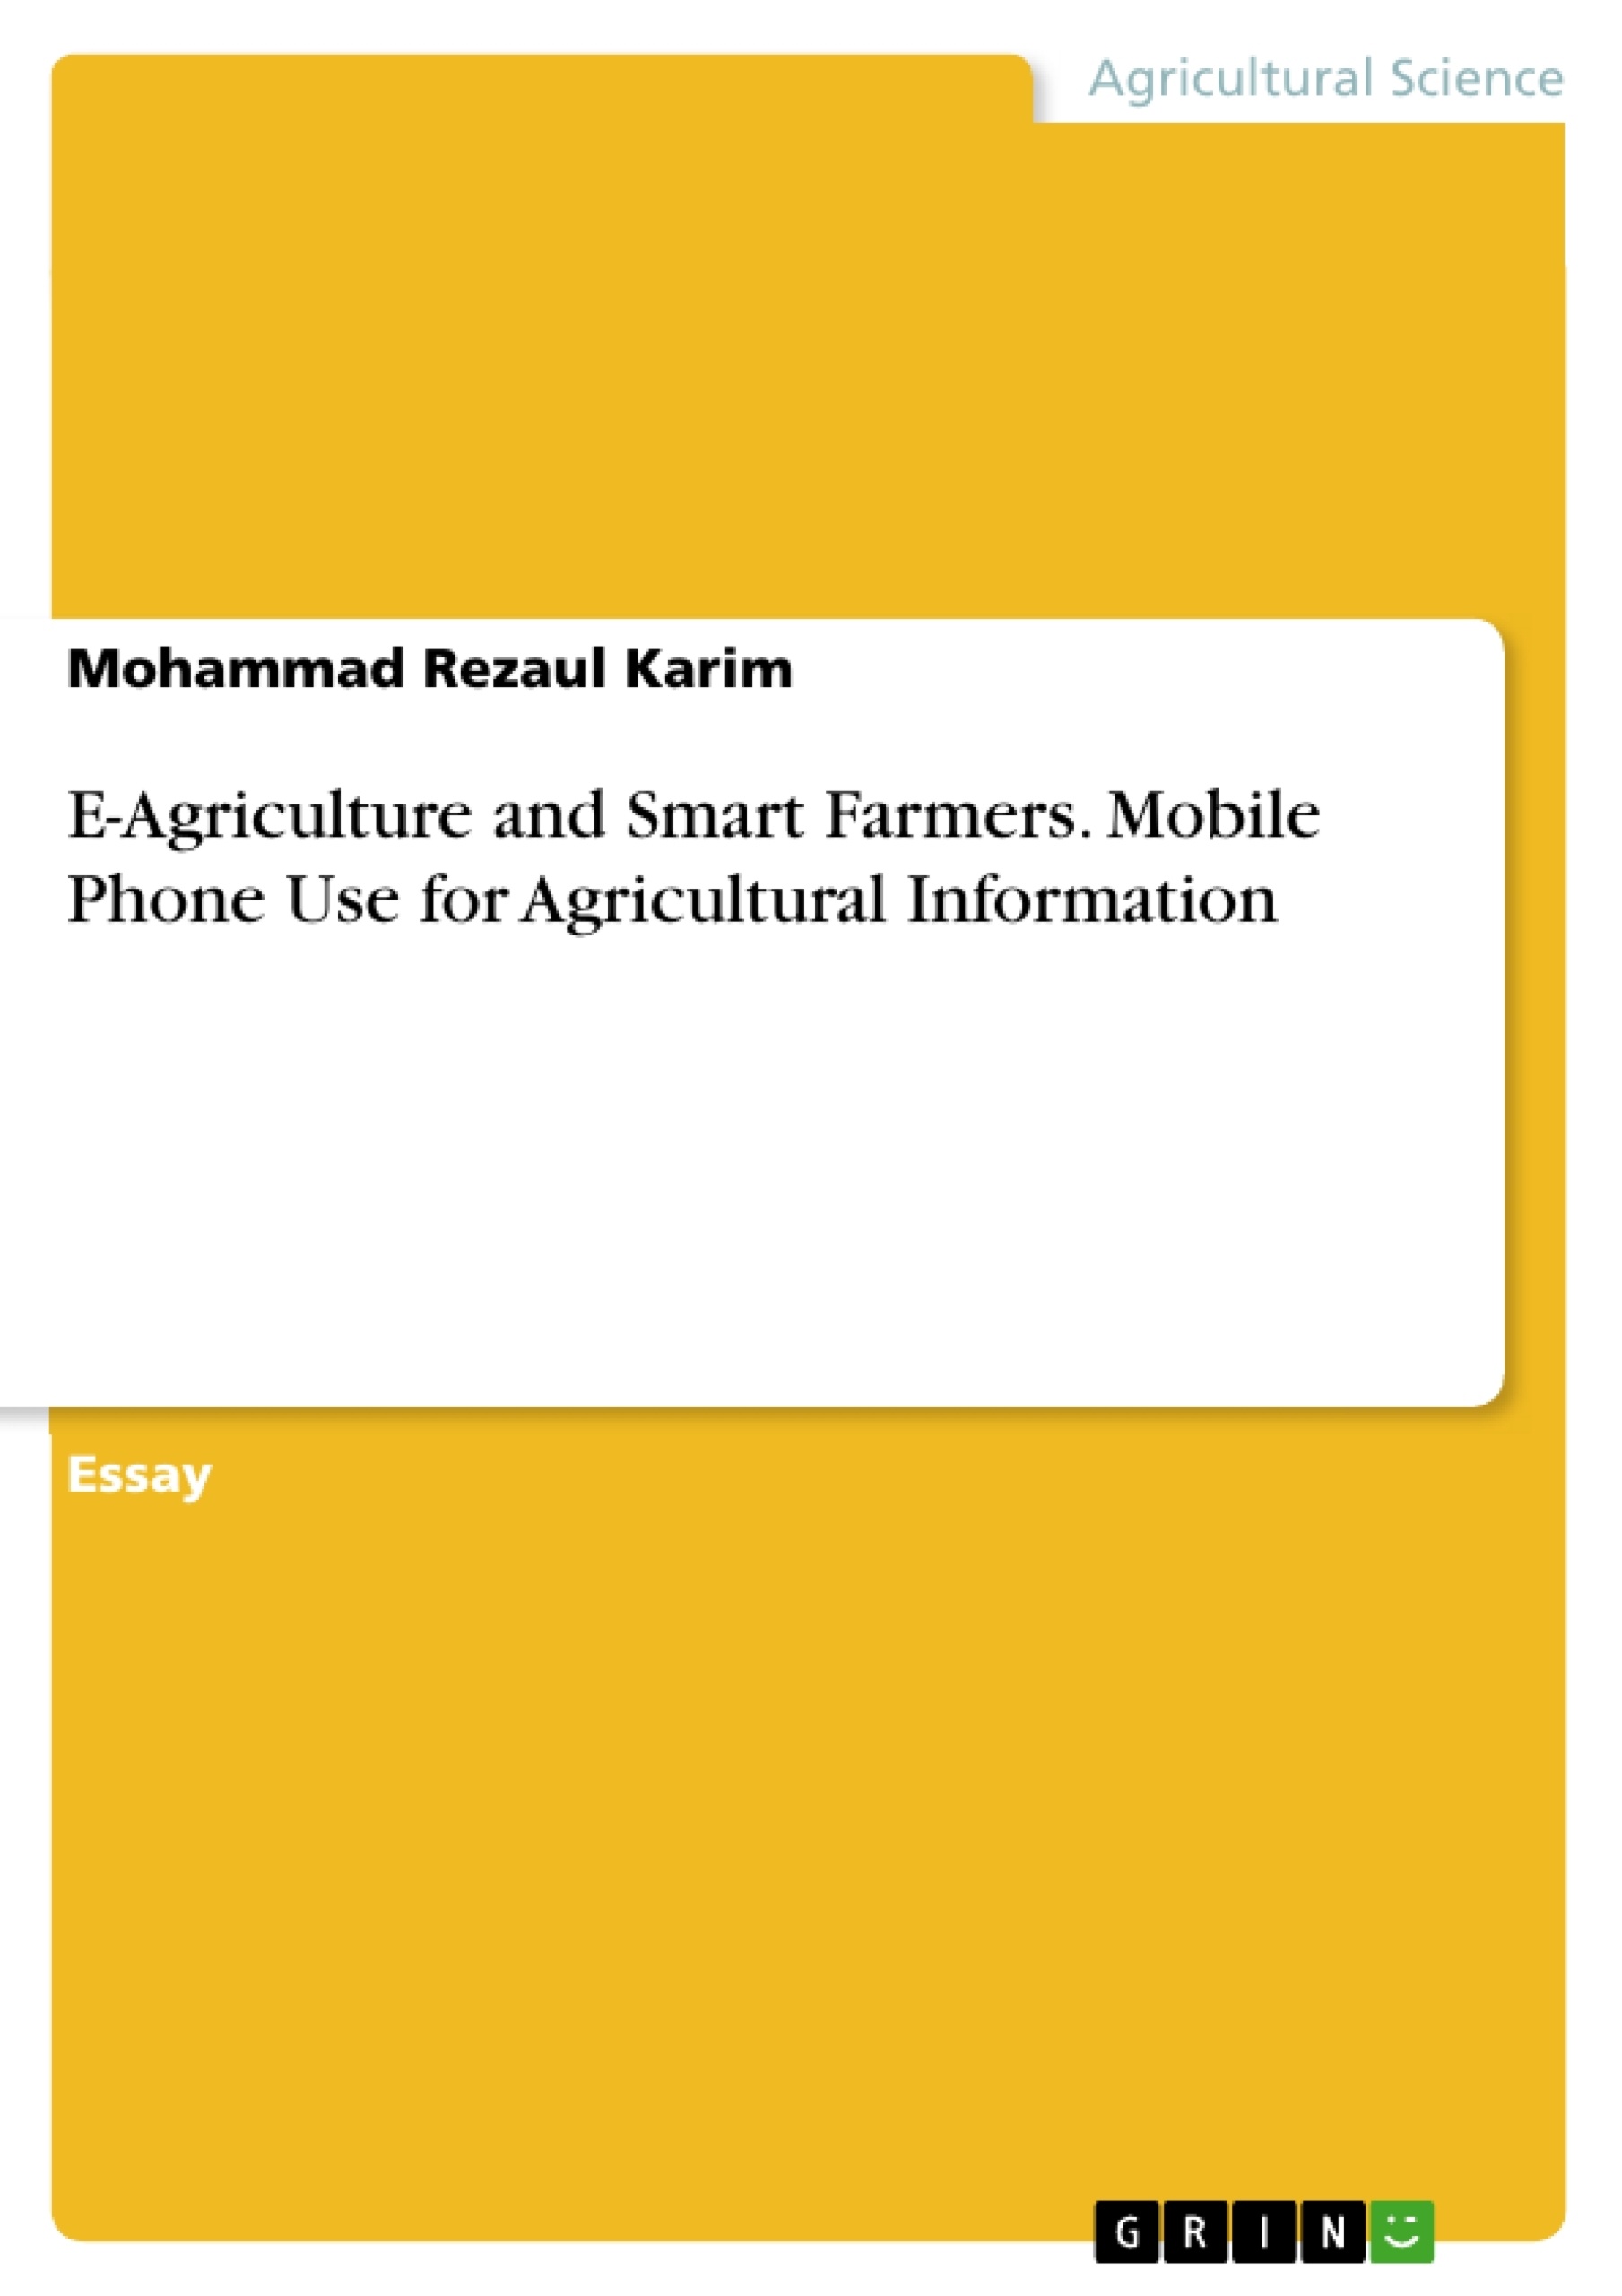 Título: E-Agriculture and Smart Farmers. Mobile Phone Use for Agricultural Information